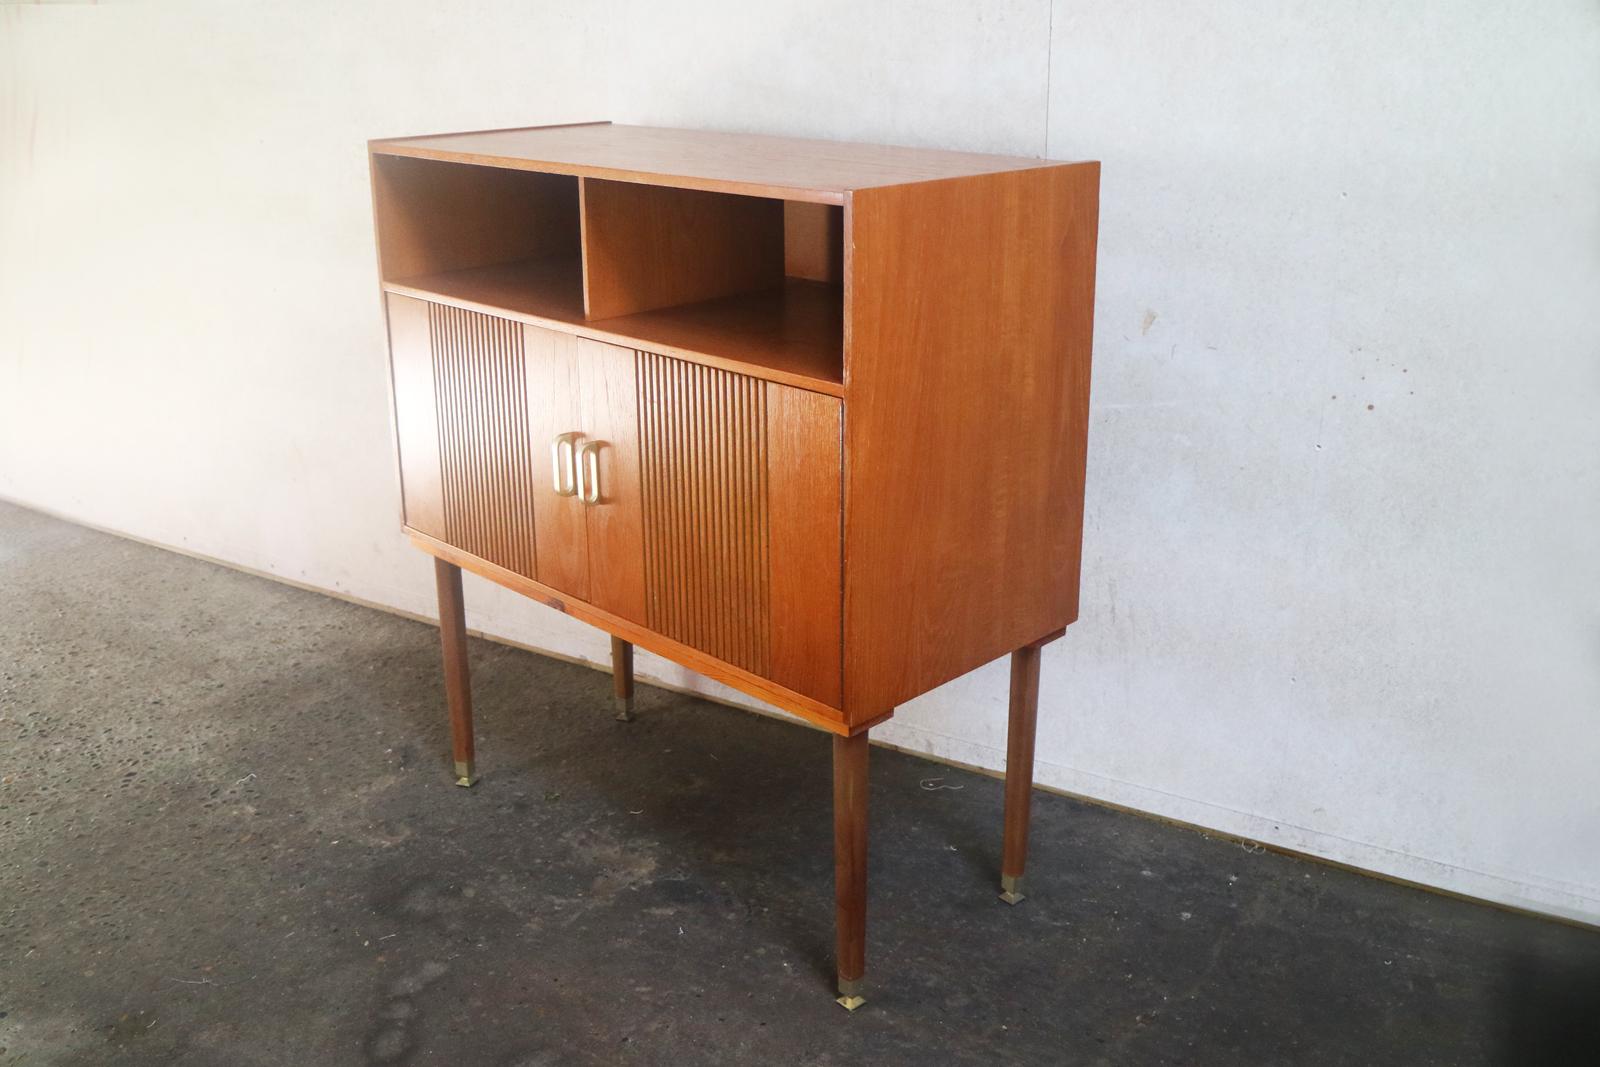 A neat Mid-Century Modern sideboard made in Belgium in the 1960s. Two open alcoves sit above a two door cupboard. Ridged detail and stylish brass handles. Sits on elegant thin feet with brass tips.

Country of origin: UK
Date of manufacture: